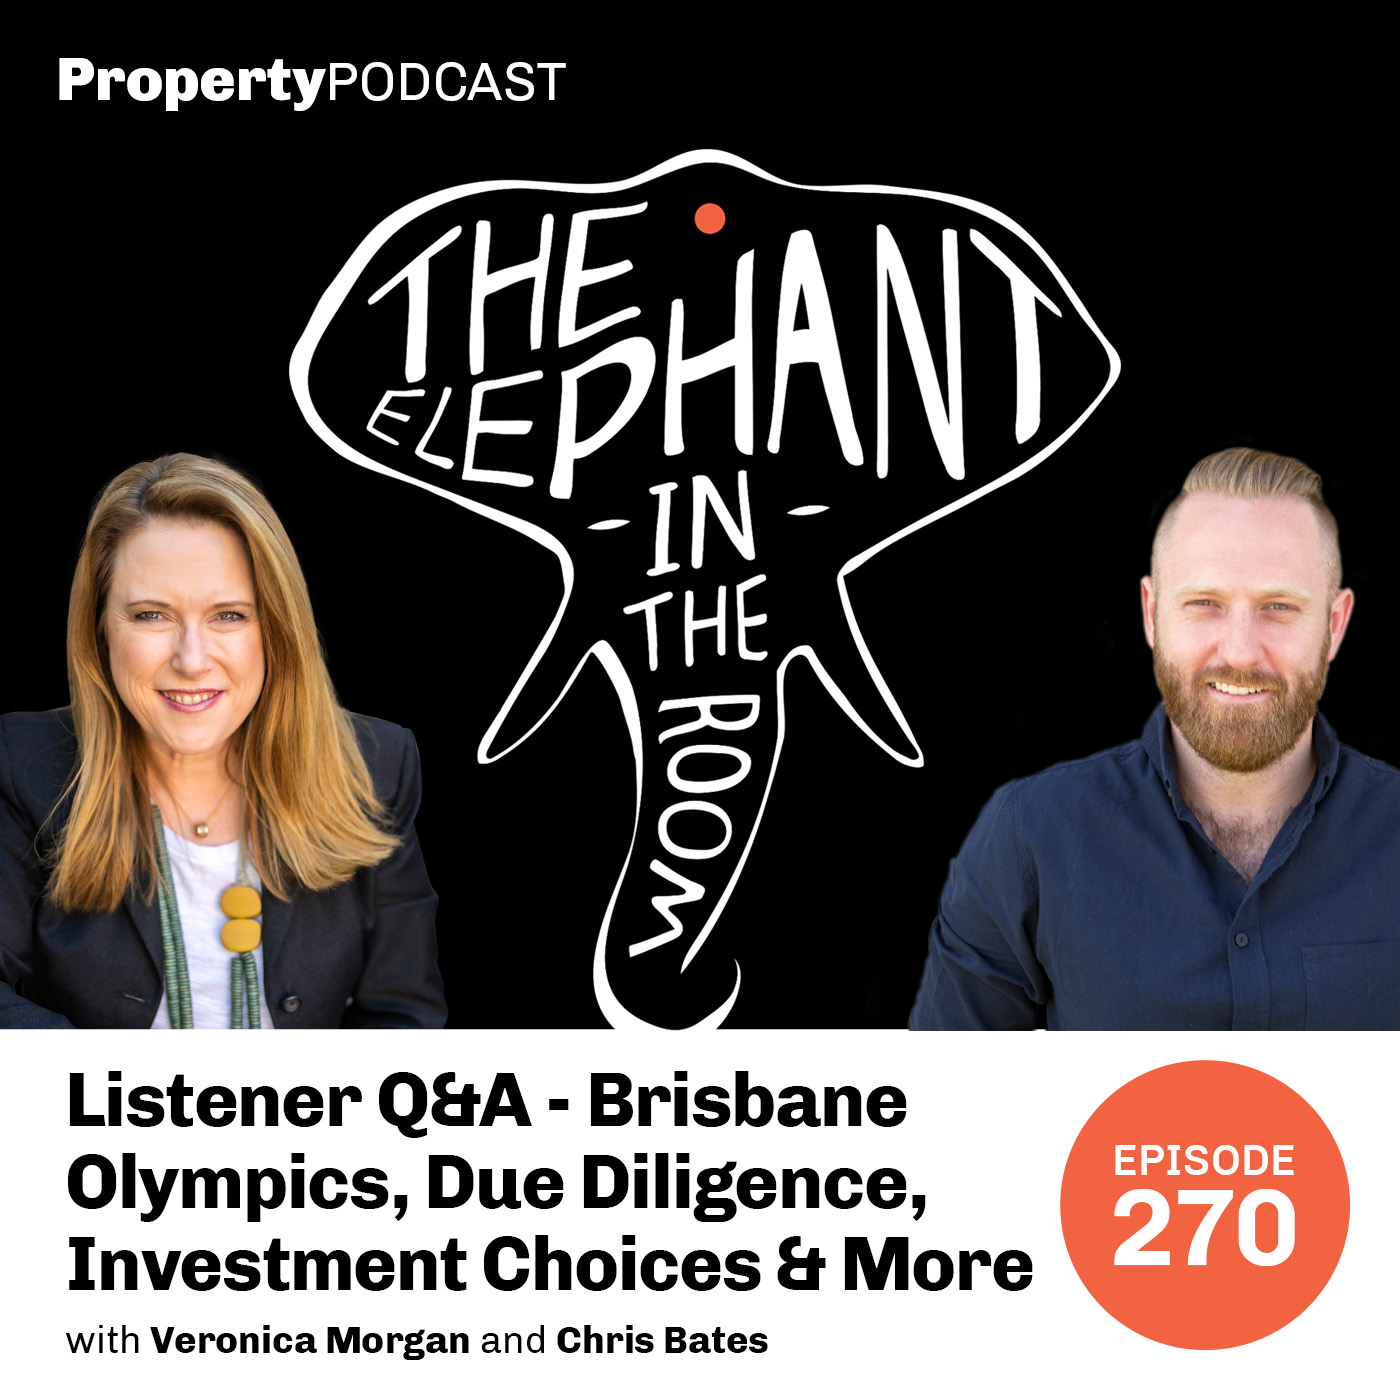 Listener Q&A - Brisbane Olympics, Due Diligence, Investment Choices & More